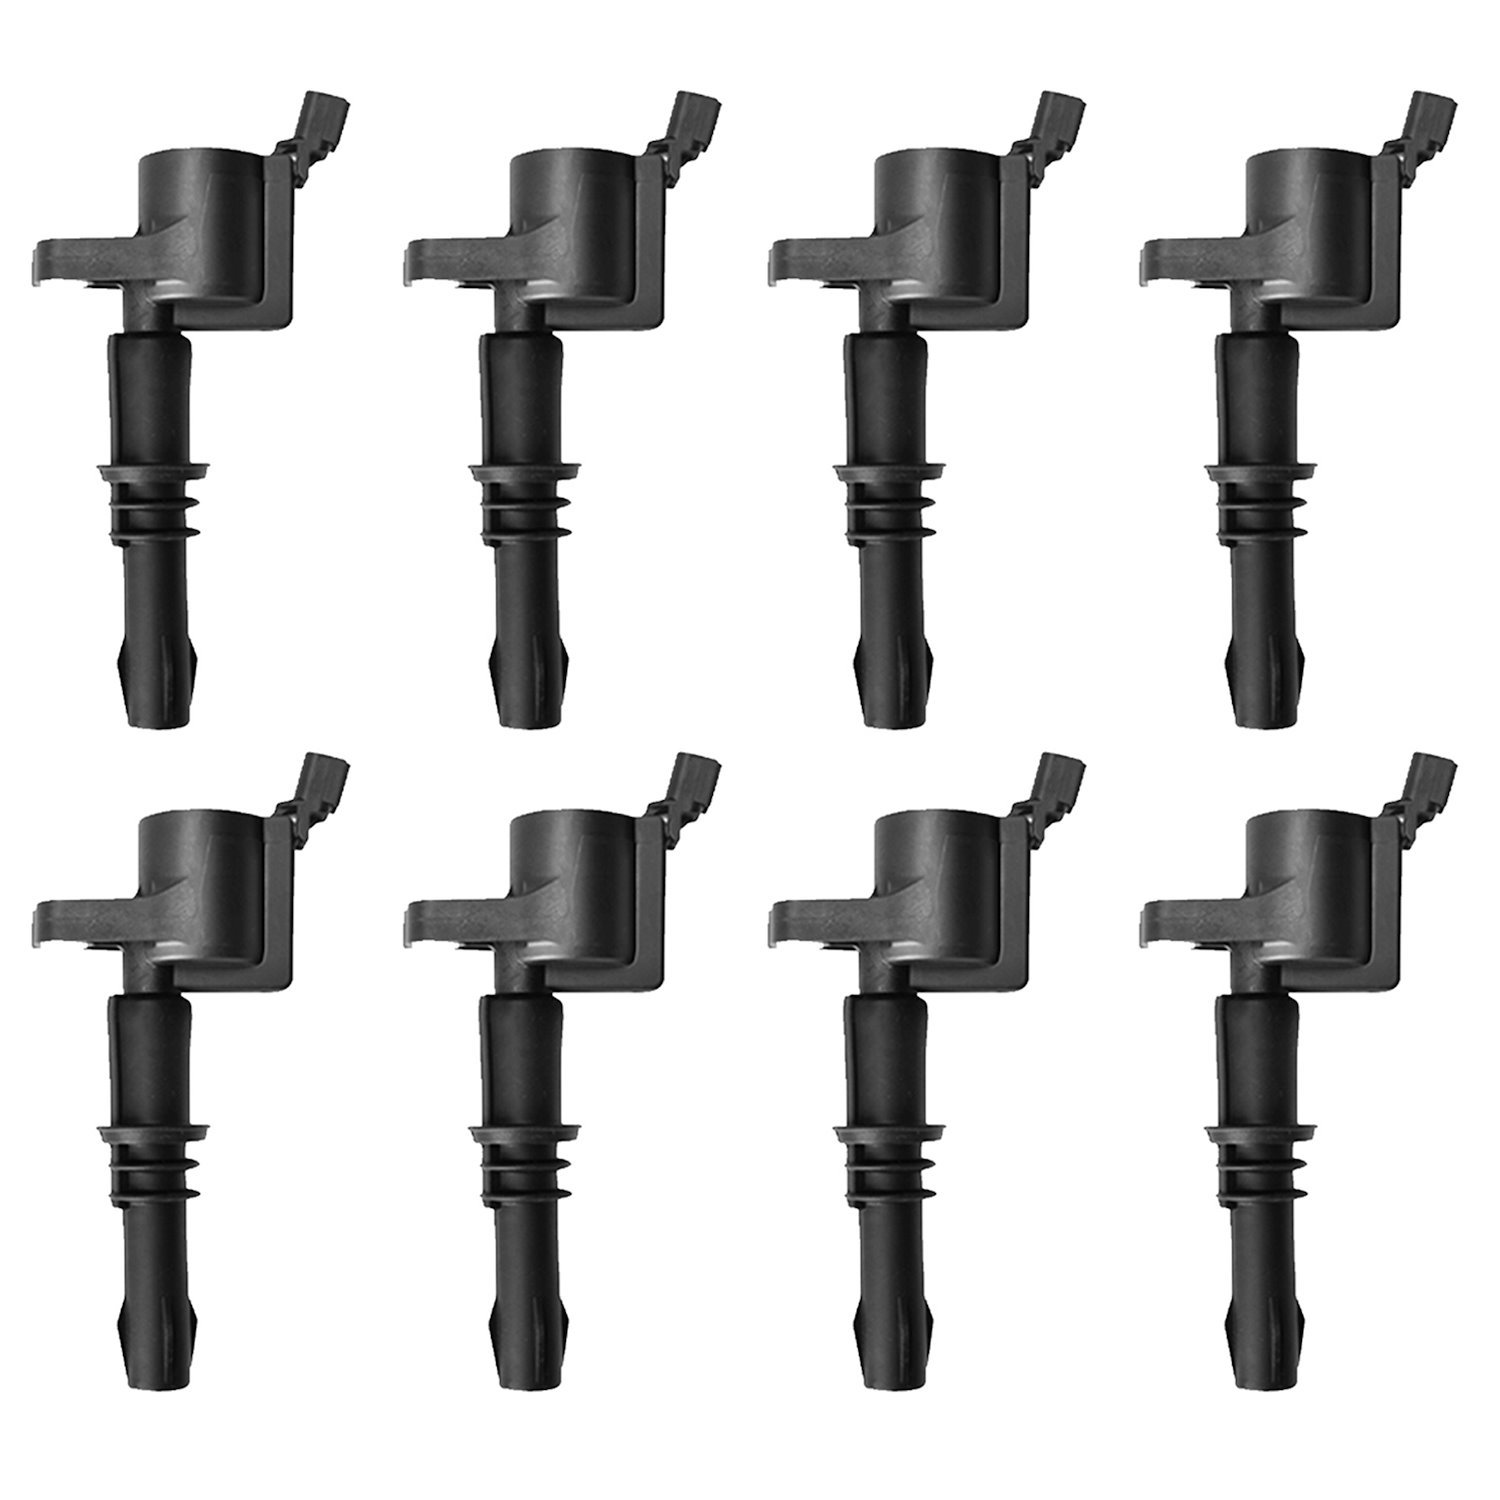 OE Replacement Ignition Coils for 2004-2008 Ford F-150/Expedition V8